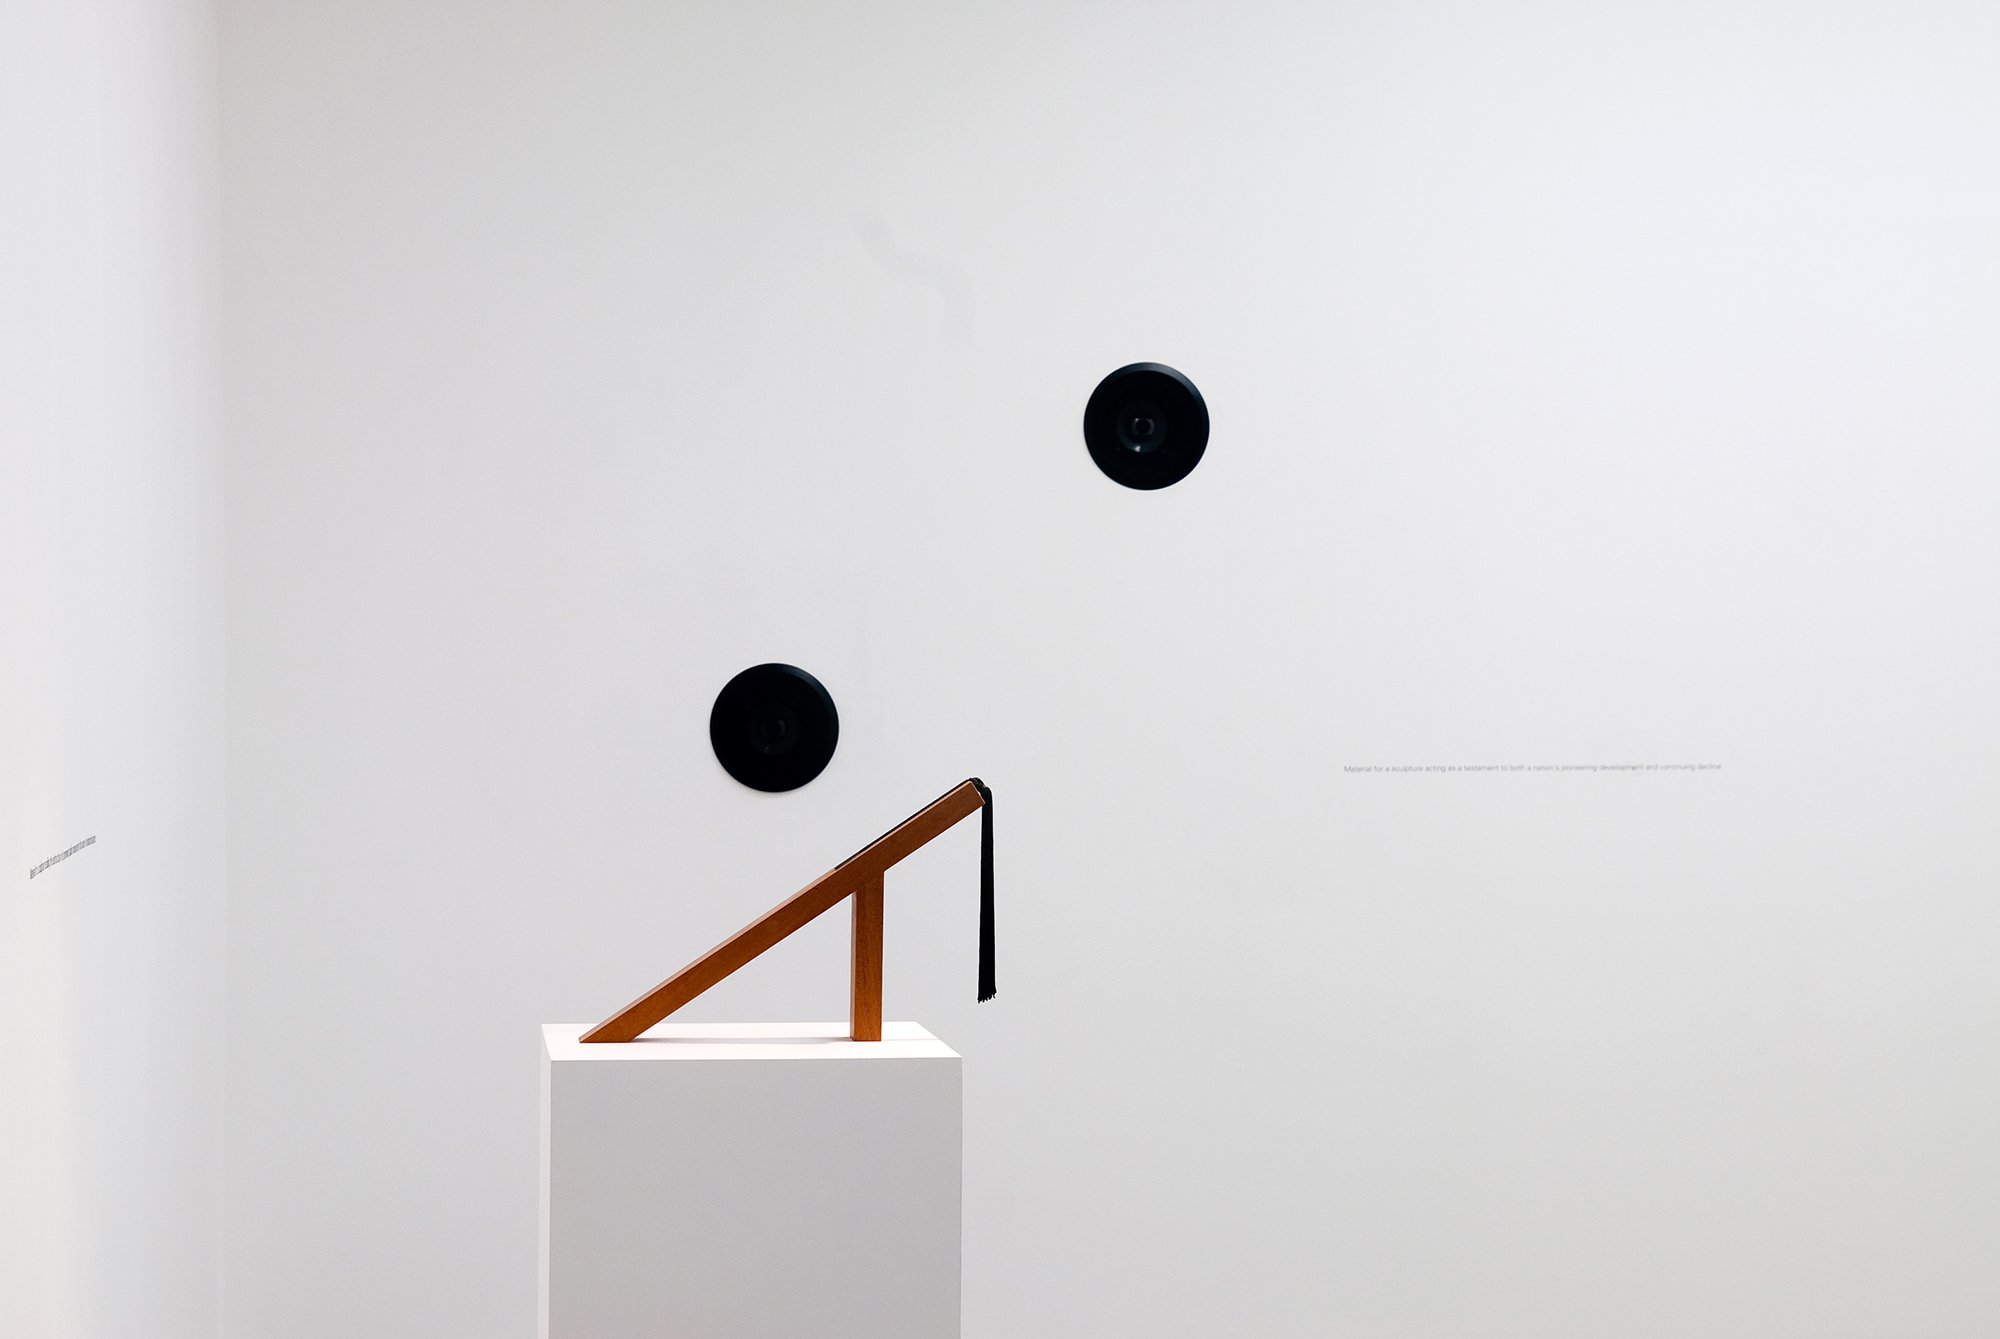 (On plinth) Iman Issa, Material for a sculpture recalling the destruction of a prominent public monument in the name of national resistance, mahogany sculpture with black tassel, white wooden pedestal, 142 x 49 cm (55 7/8 x 19 1/4 in), 64 points vinyl writing, 2010(On wall) Iman Issa,  Material for a sculpture acting as a testament to both a nation’s pioneering development and continuing decline, sound installation, 10 sec. sound in 5 min., interval, 64 points vinyl writing, 2011